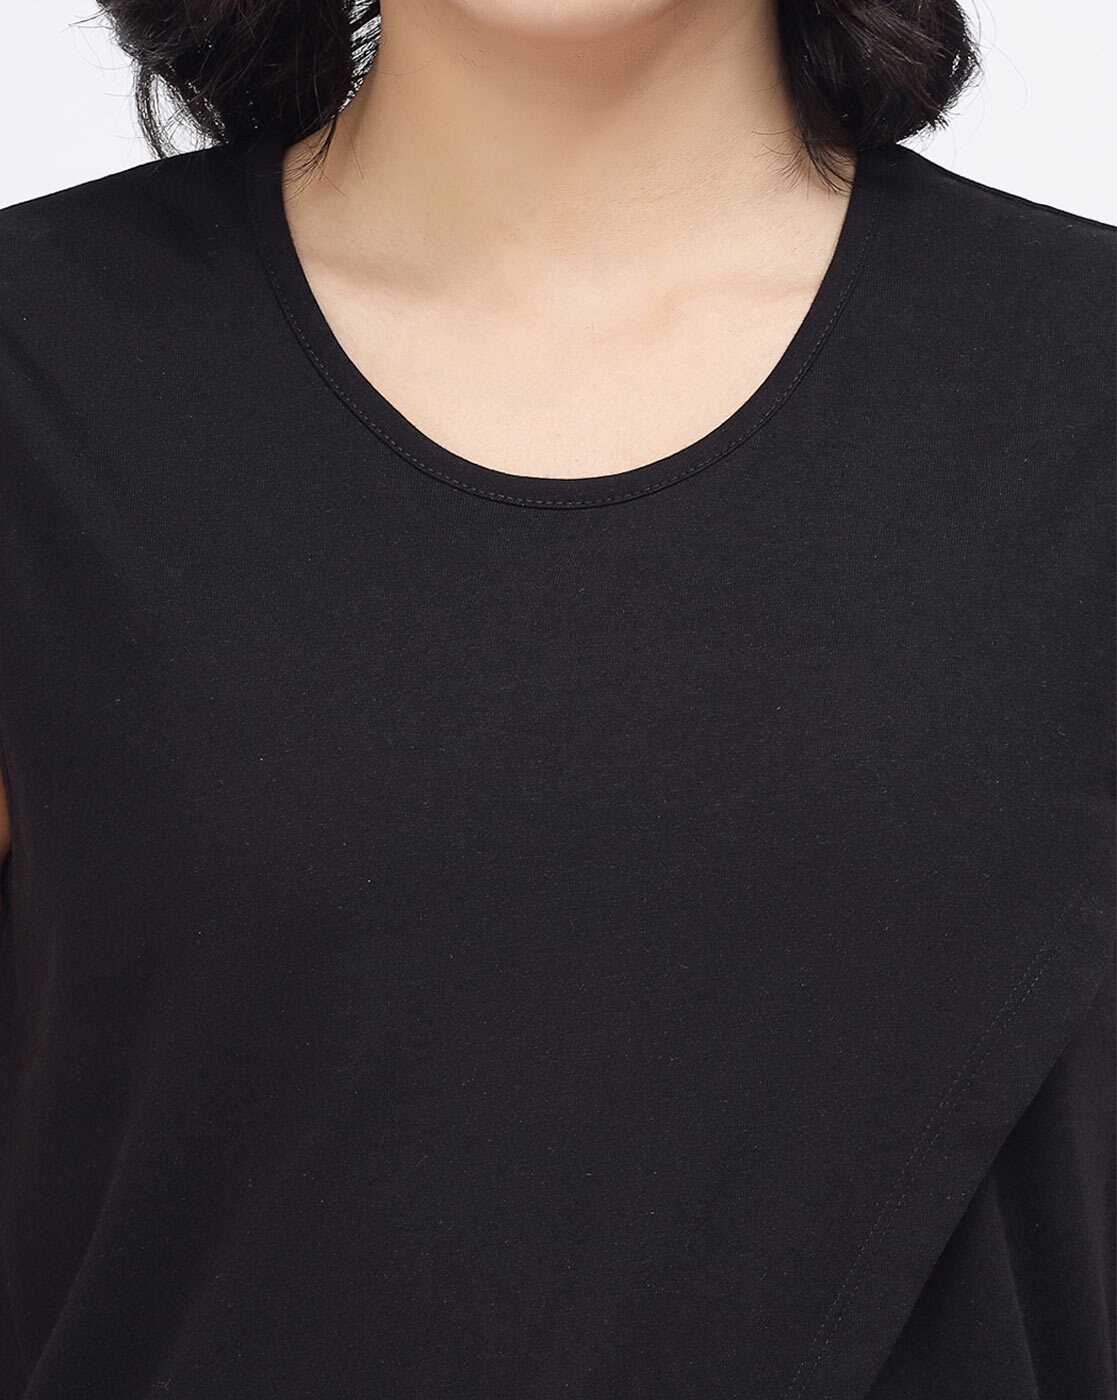 Buy Black Tops for Women by YOONOY Online